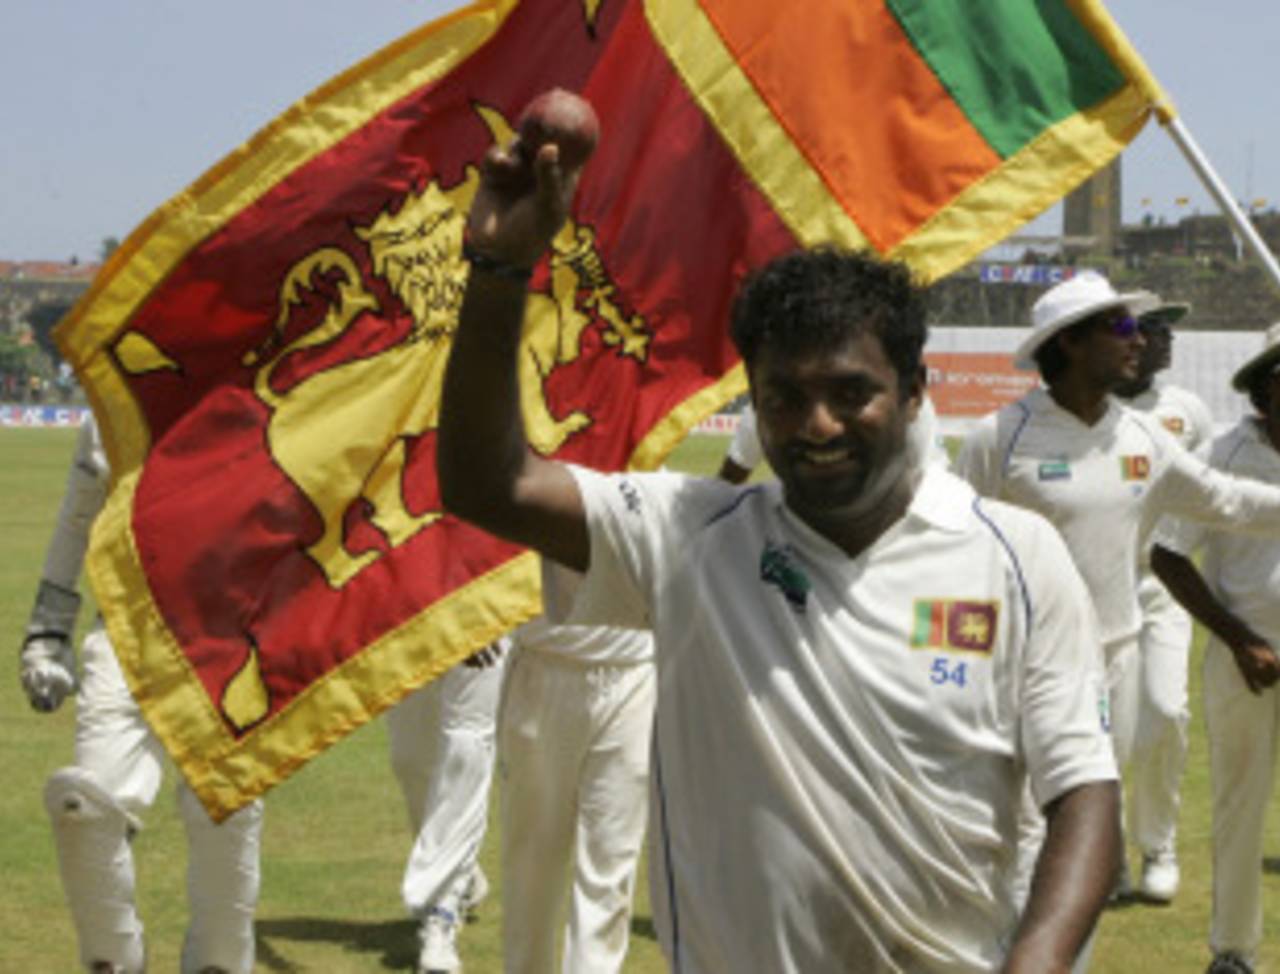 Muttiah Muralitharan acknowledges his five-wicket haul, Sri Lanka v India, 1st Test, Galle, 4th day, July 21, 2010